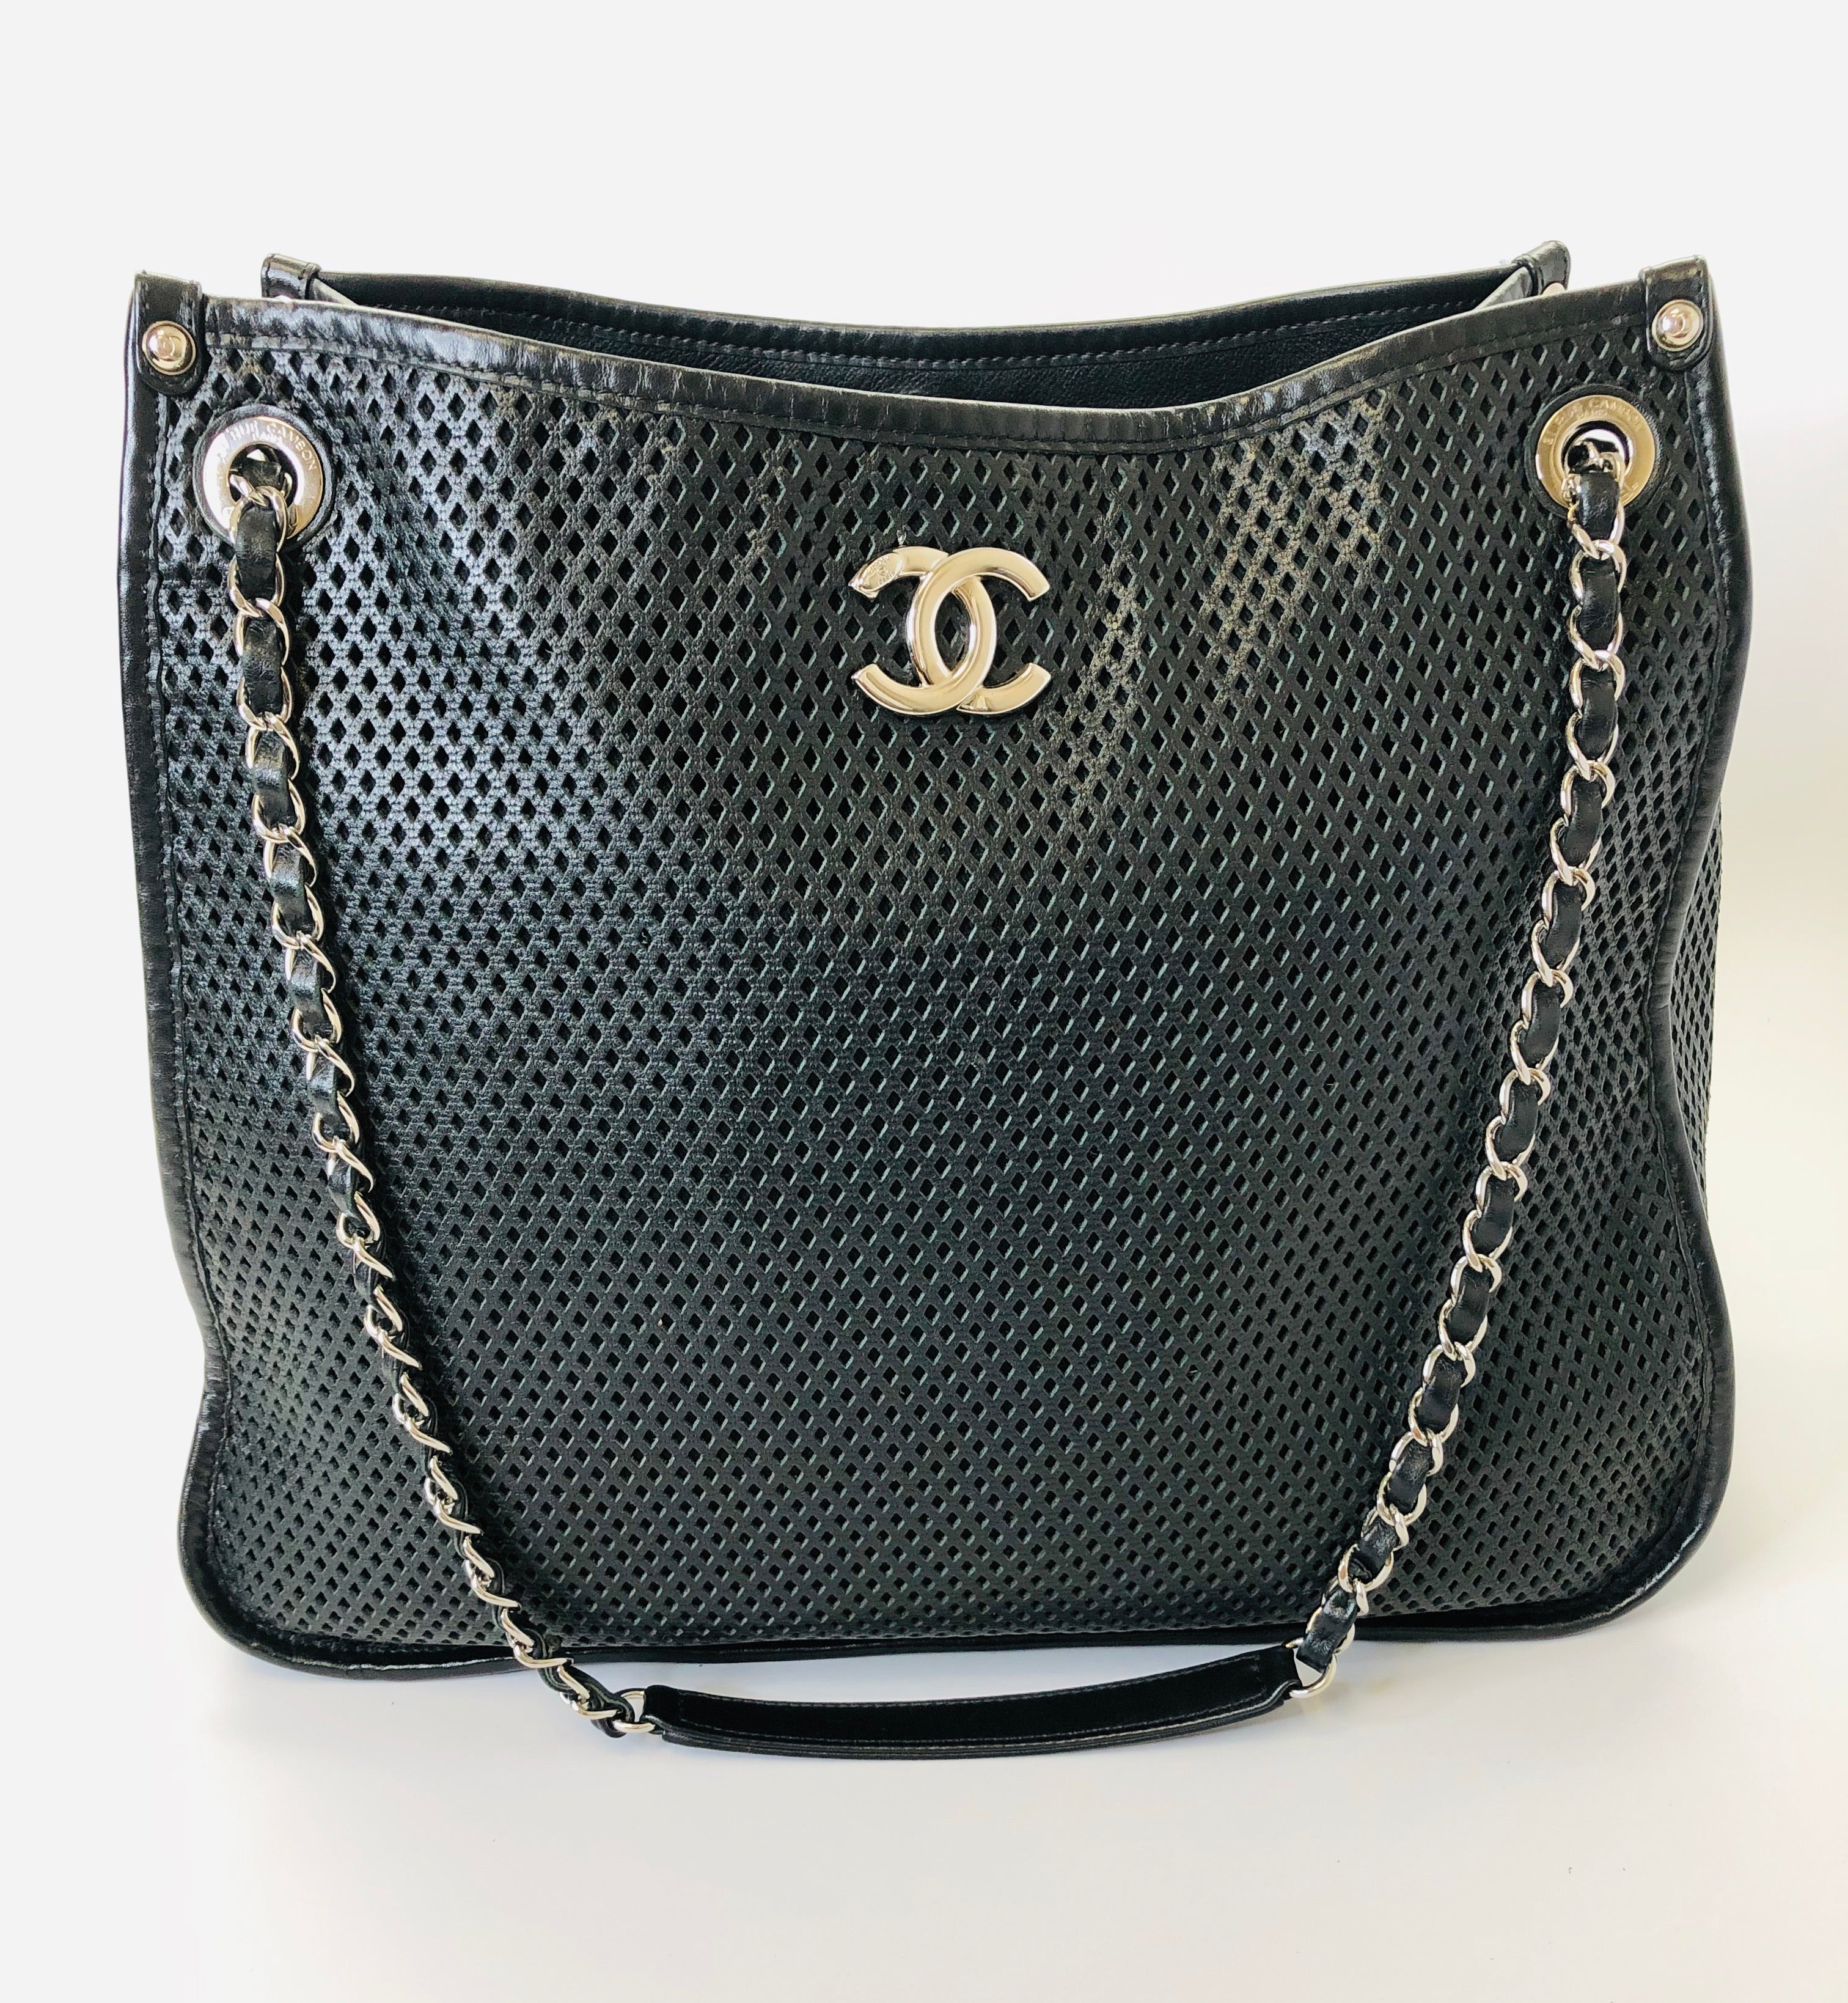 CHANEL Large Up In The Air Tote Bag